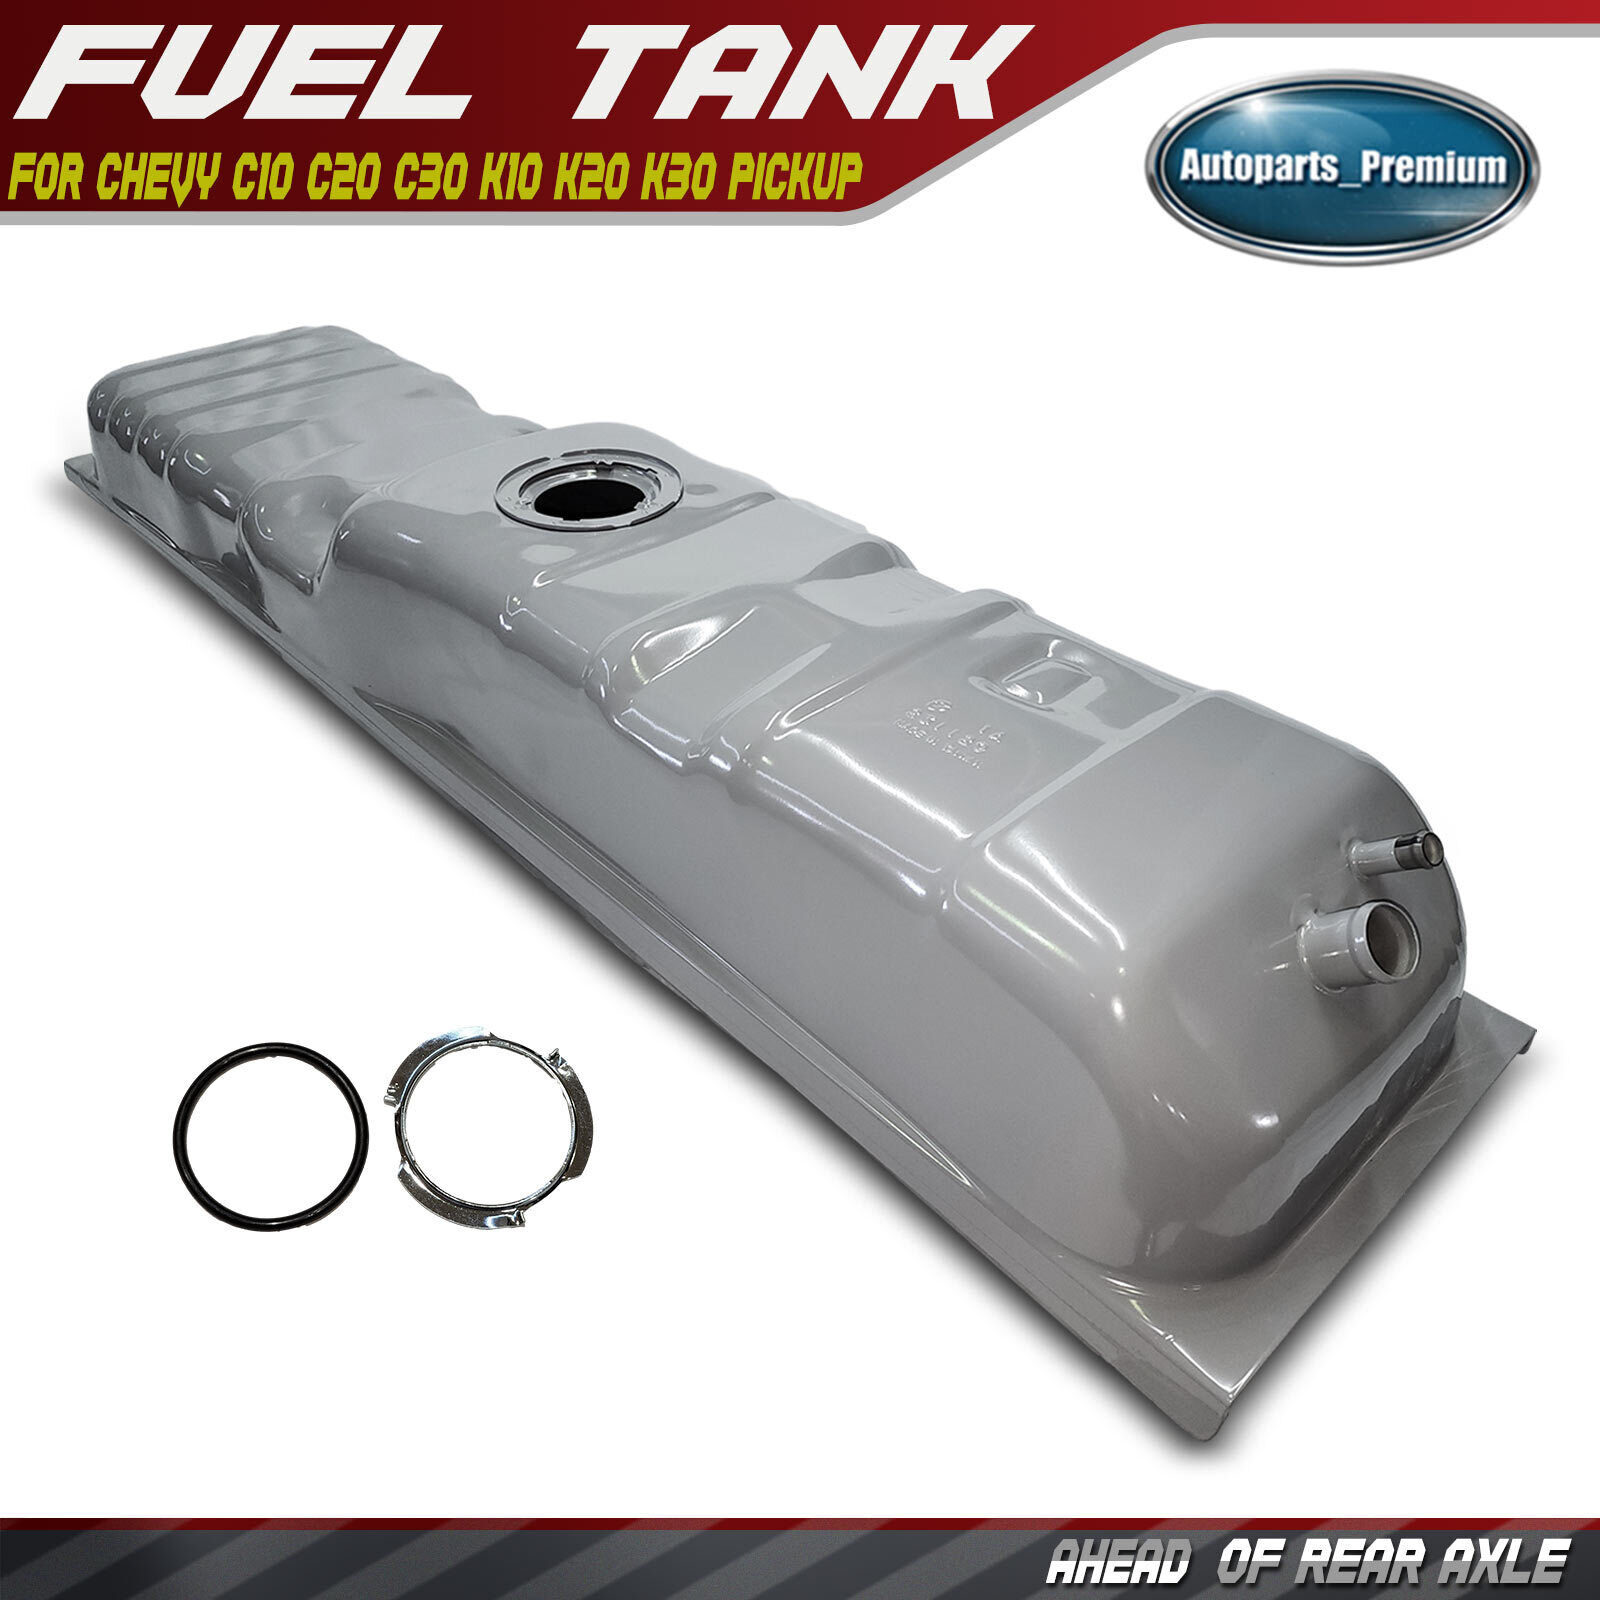 20 Gallons Fuel Tank for Chevy C10 C20 C30 K10 K20 K30 Pickup Ahead Of Rear Axle